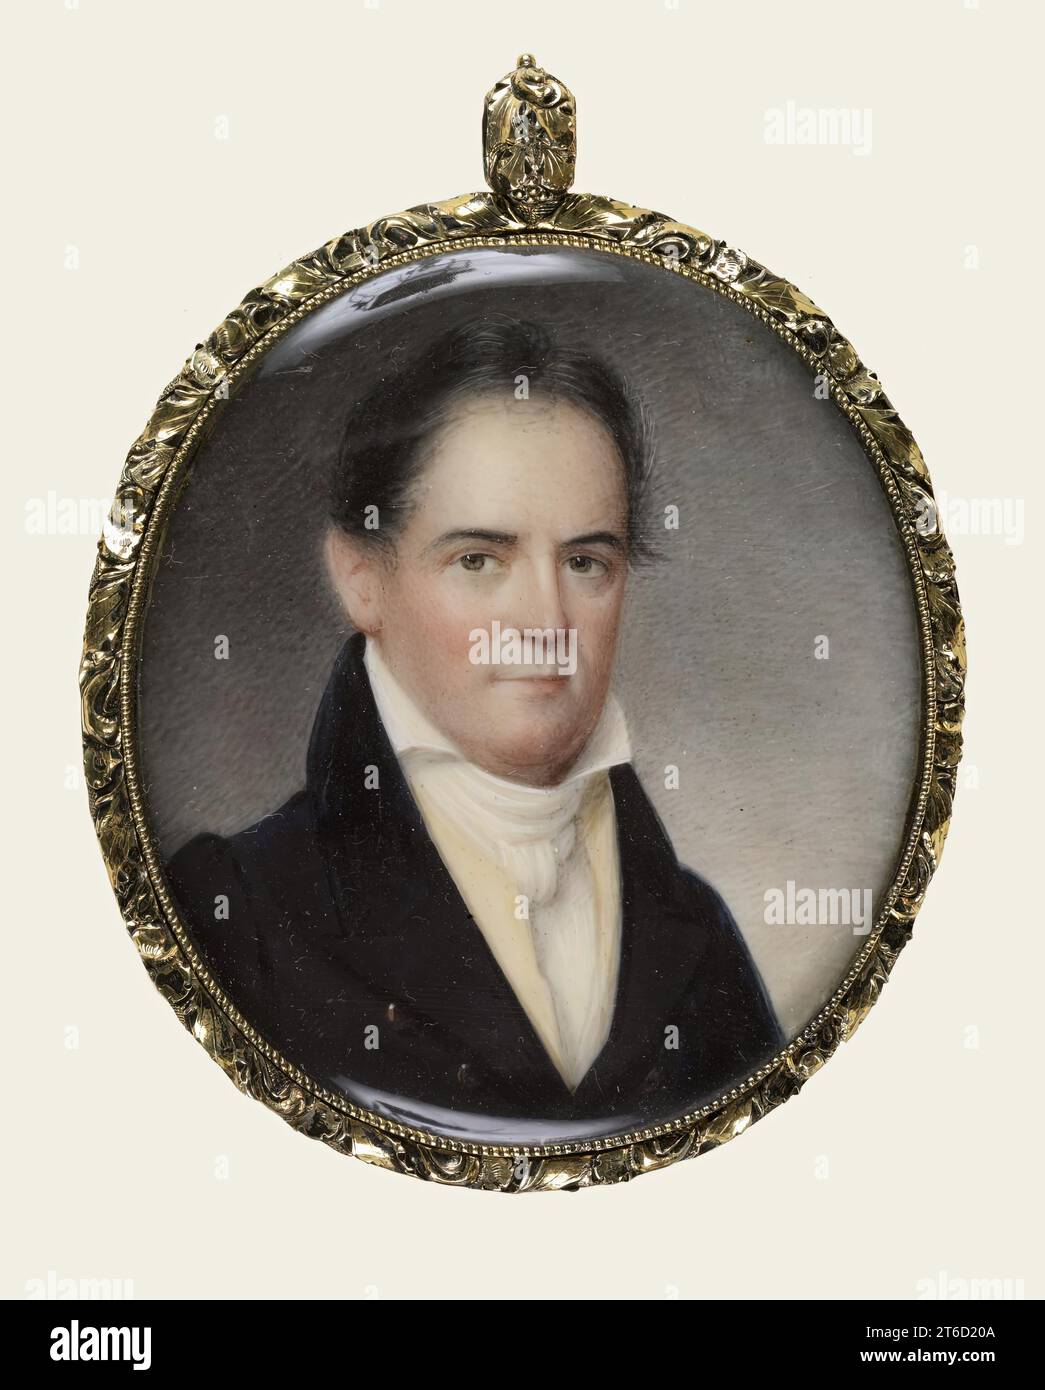 A Gentleman, c1825. Bust-length portrait of man with black hair, wearing a black coat with a high white collar. Attributed to Anna Claypoole Peale. Stock Photo